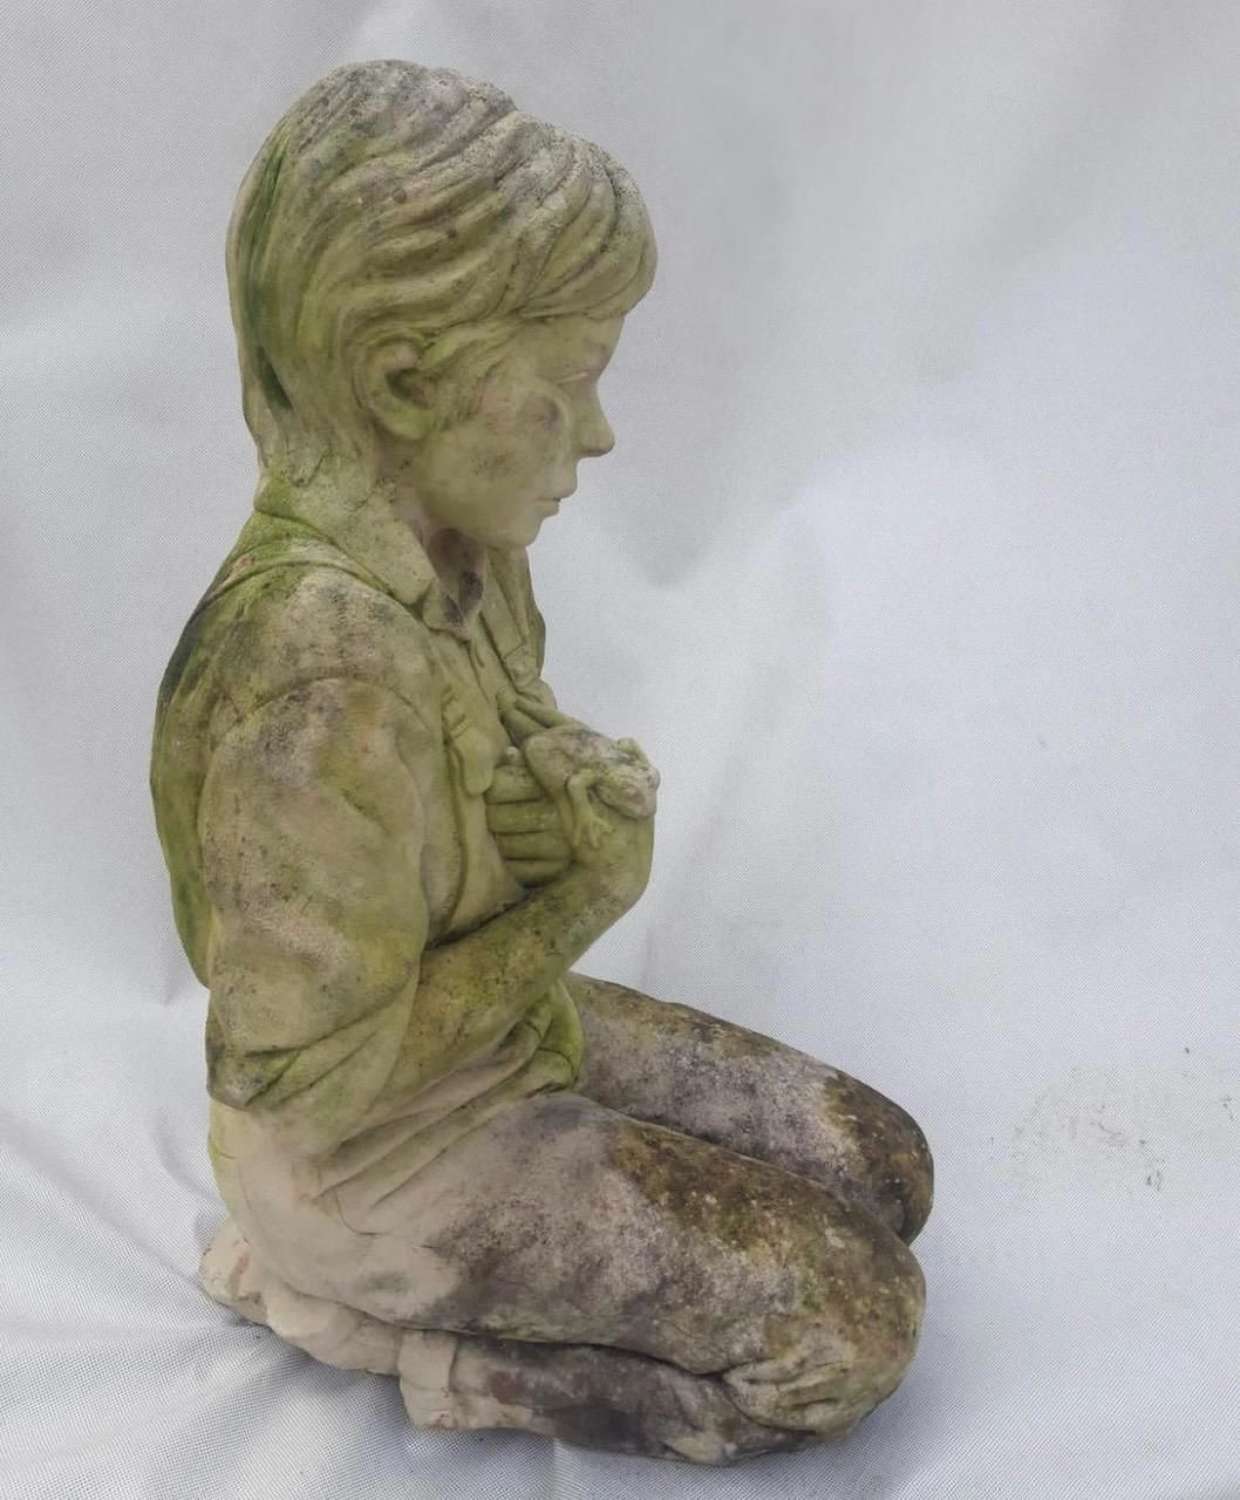 Stone Figure of Boy with a Frog